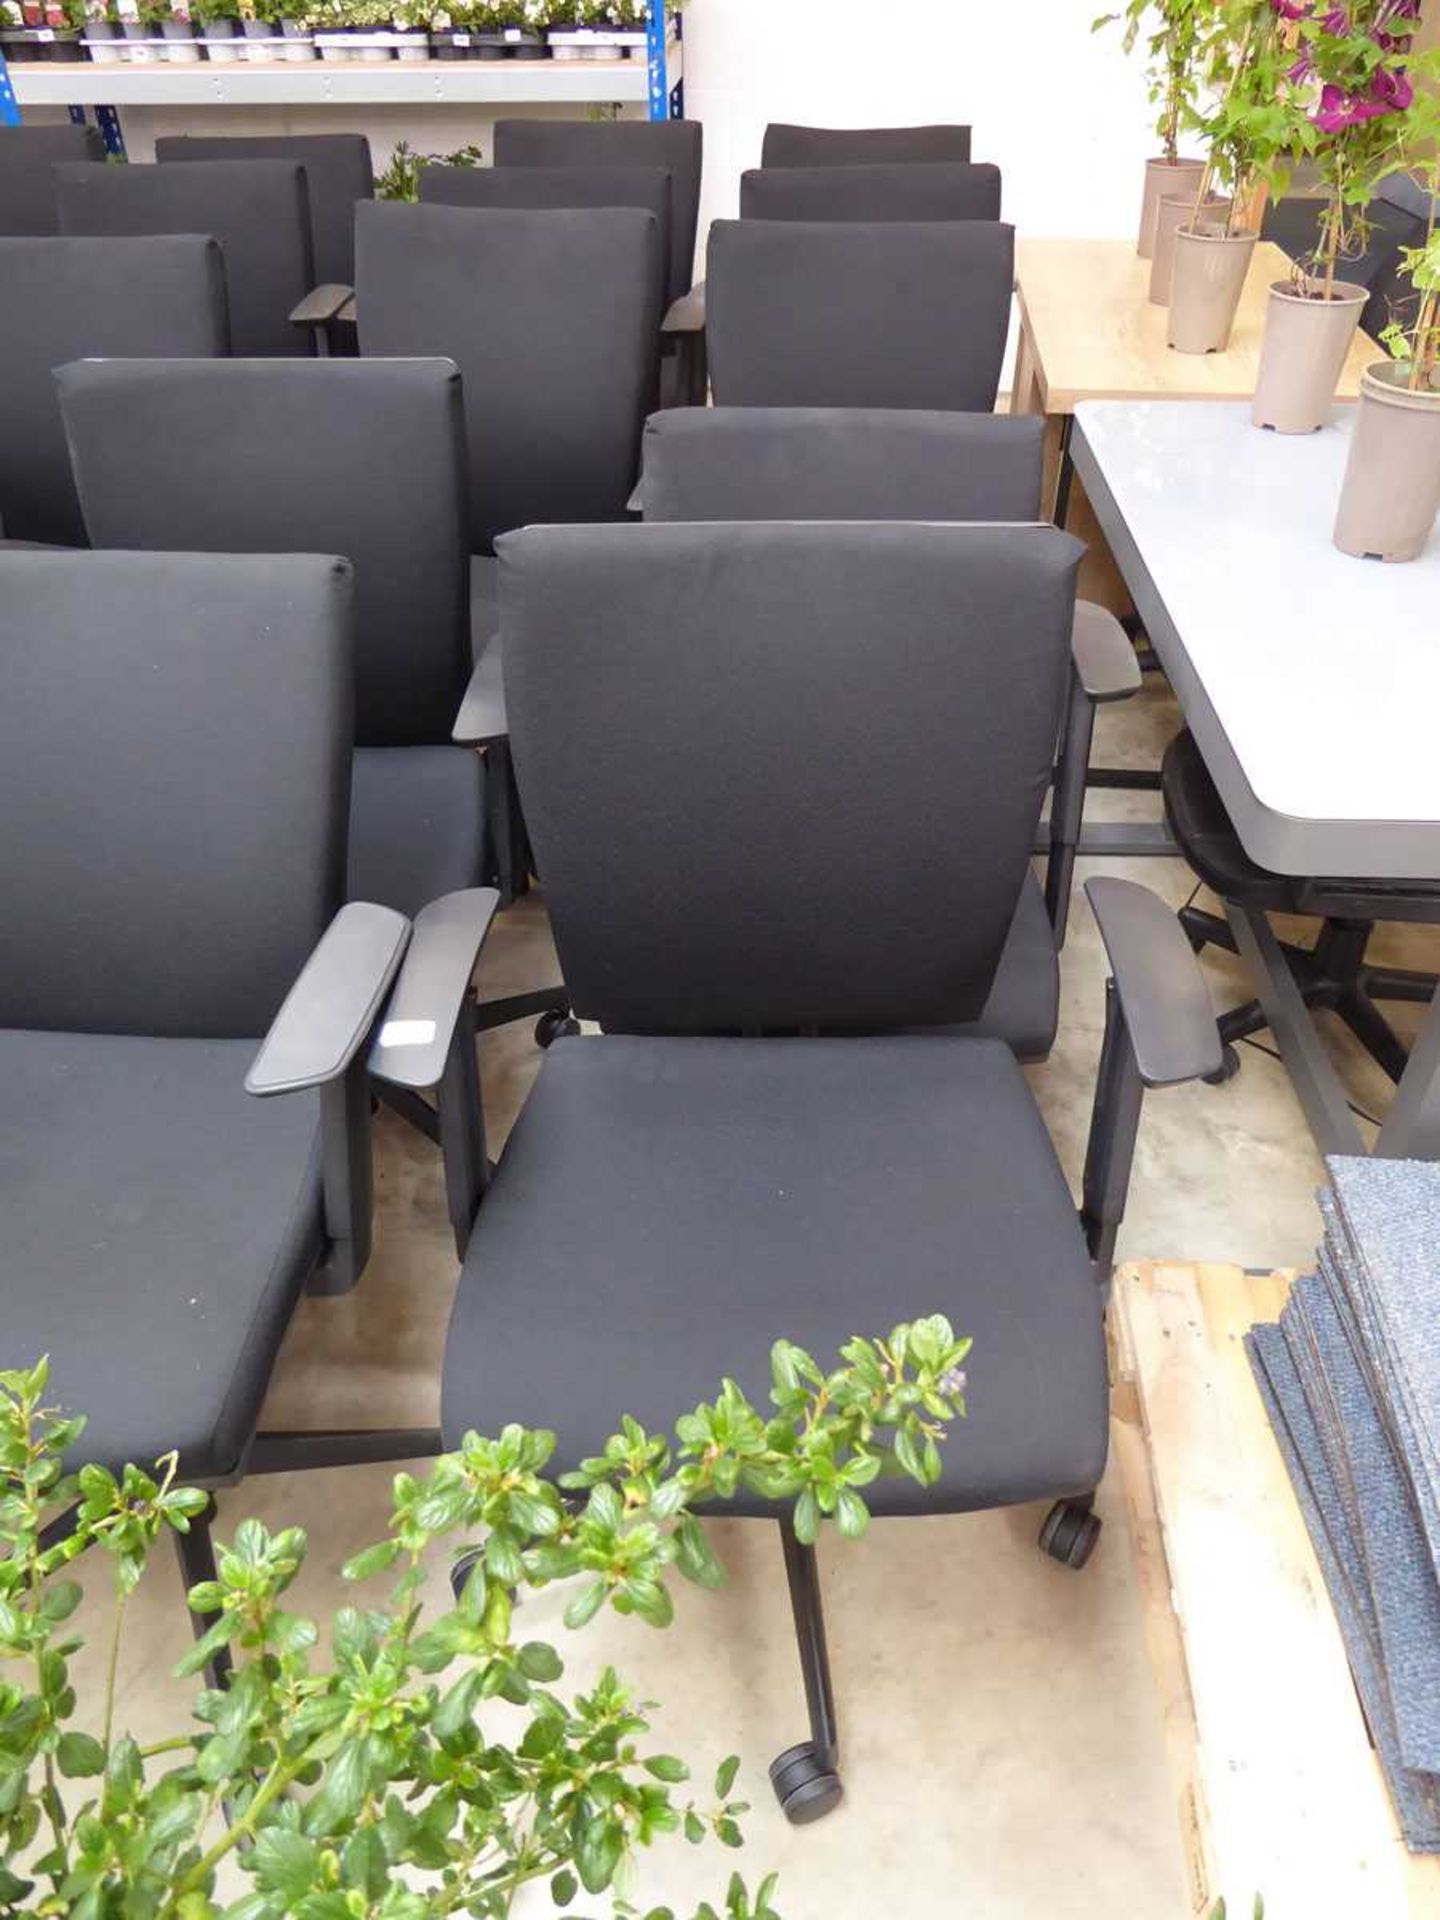 Set of 5 black cloth twin armed office armchairs